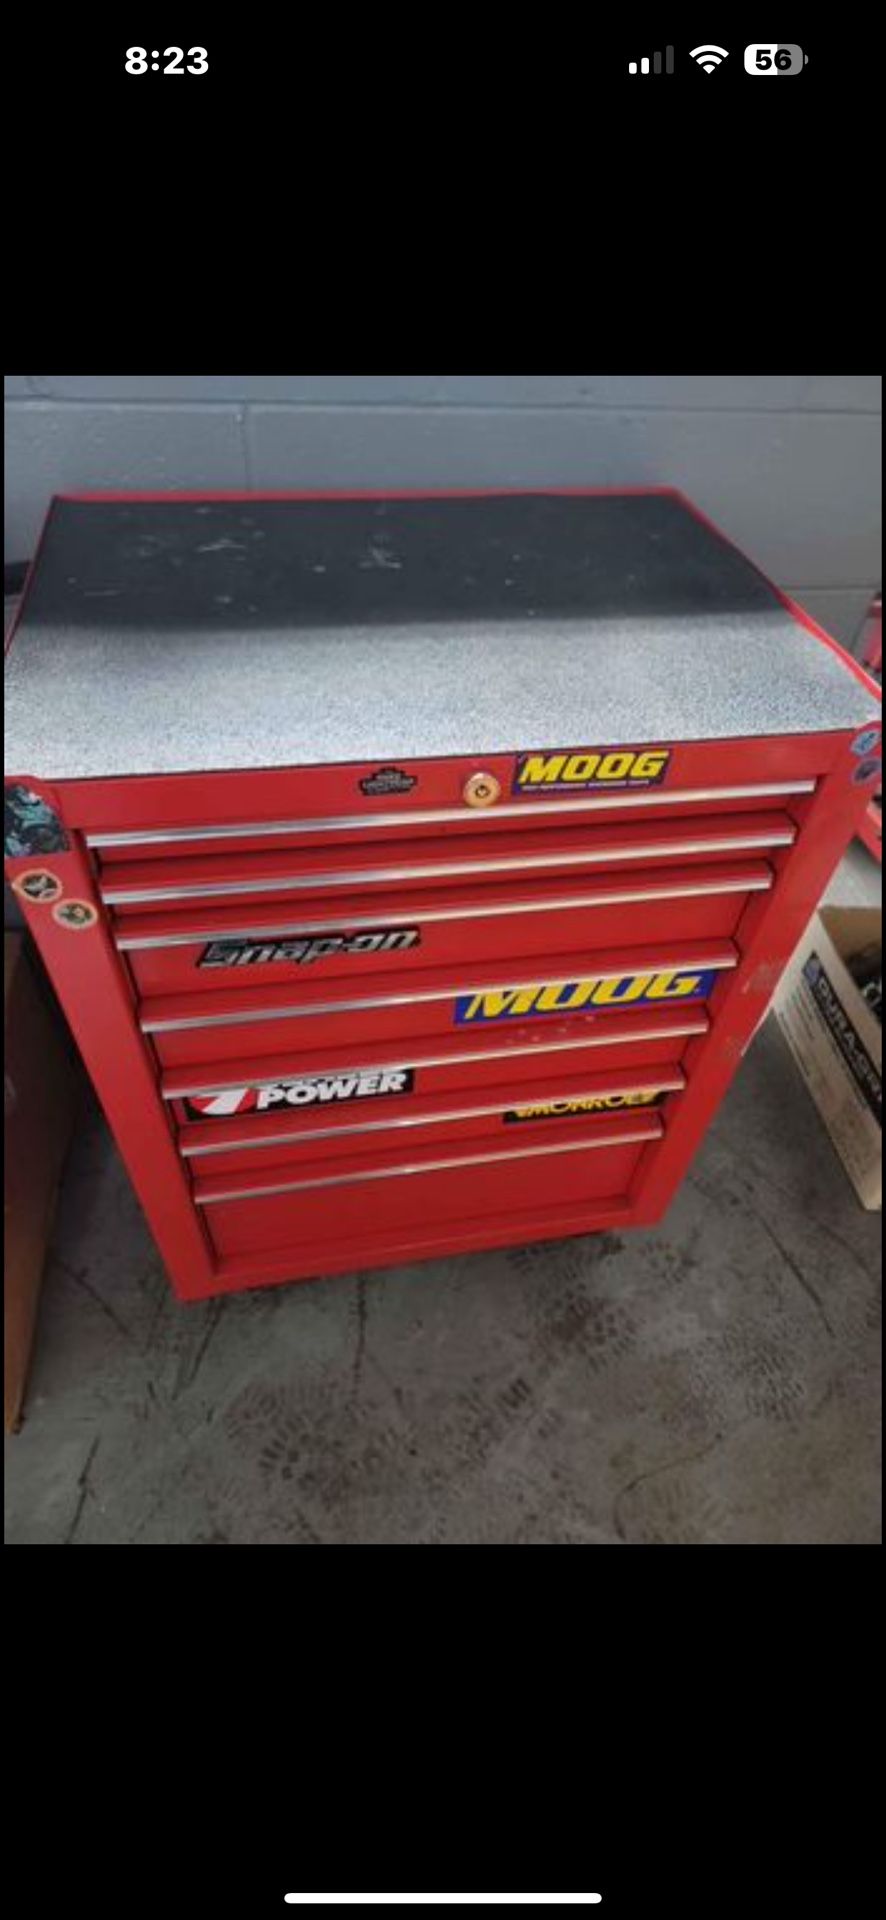 Snap On Mobile Tool Box